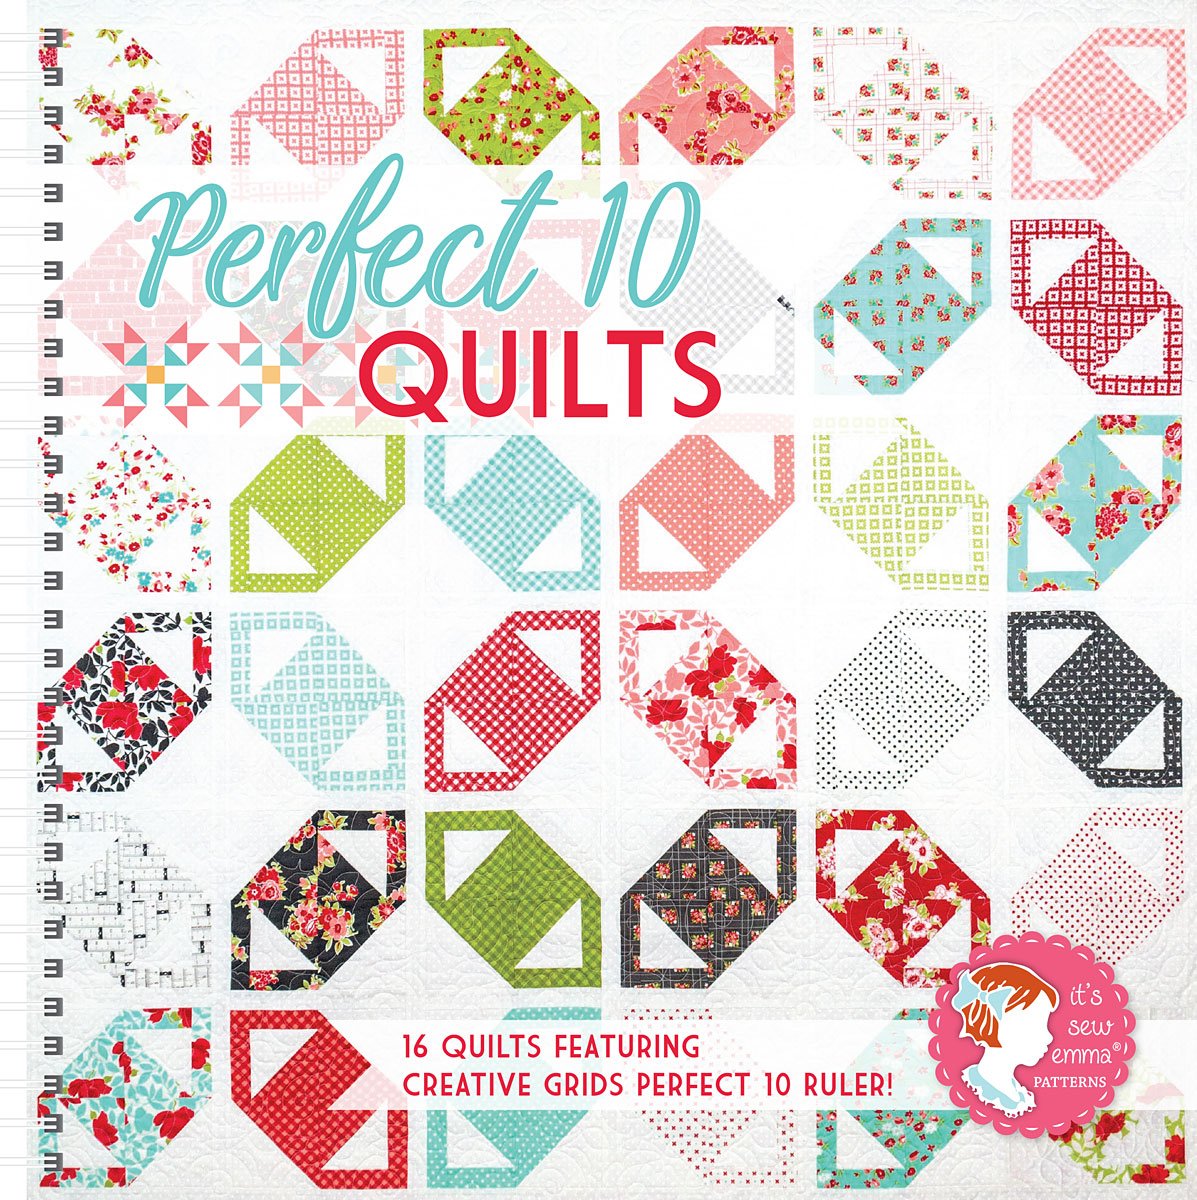 Perfect 10 Quilts bundle - pattern book and ruler